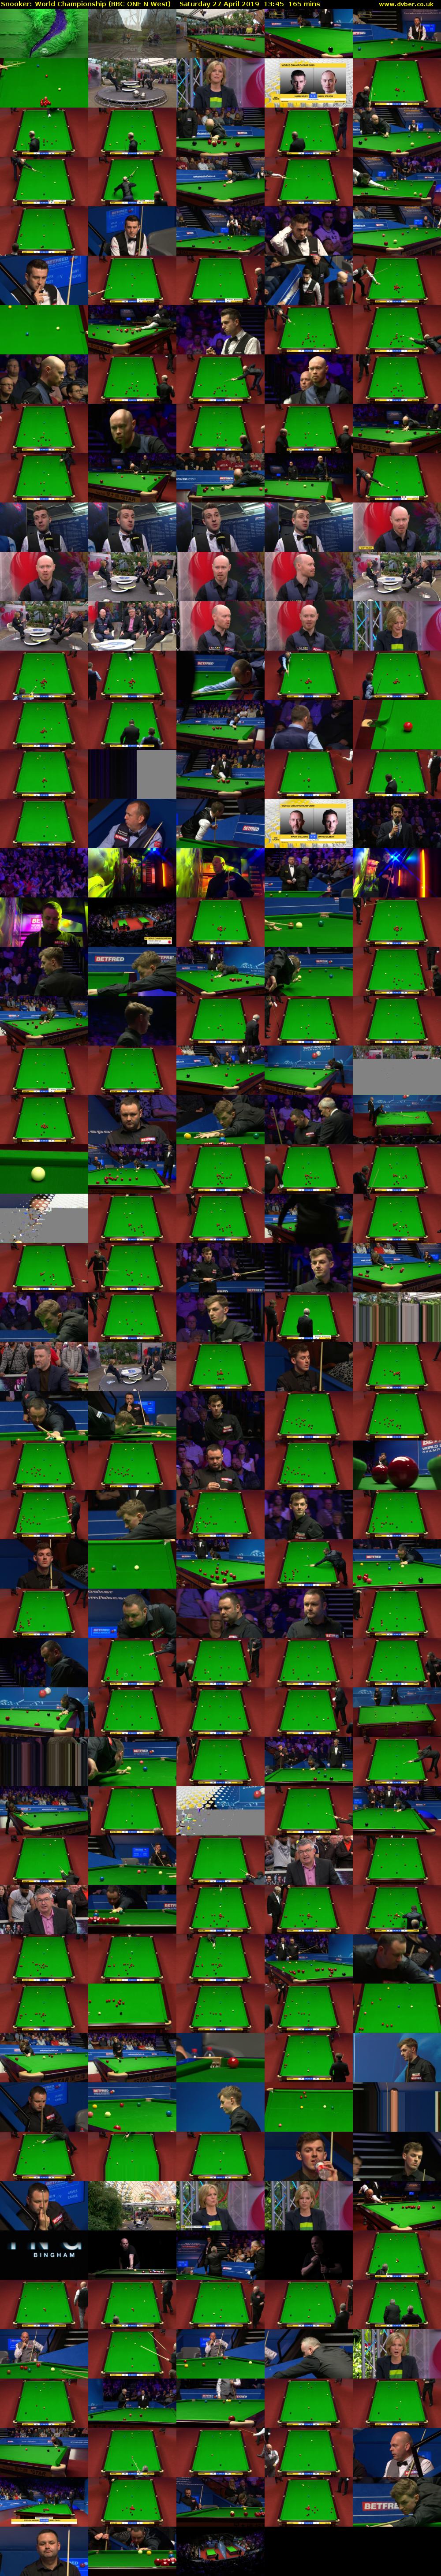 Snooker: World Championship (BBC ONE N West) Saturday 27 April 2019 13:45 - 16:30